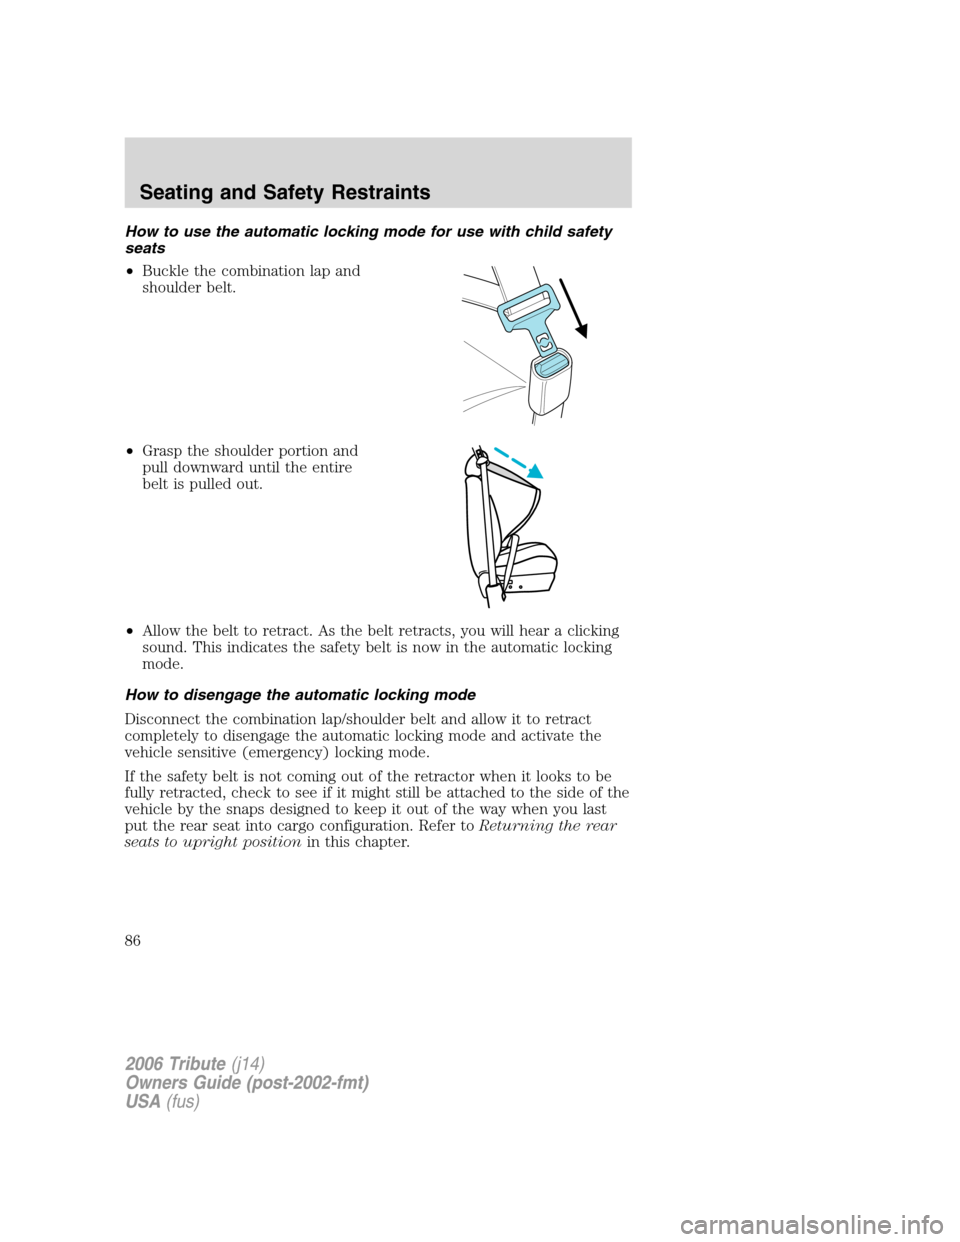 MAZDA MODEL TRIBUTE 2006  Owners Manual (in English) How to use the automatic locking mode for use with child safety
seats
•Buckle the combination lap and
shoulder belt.
•Grasp the shoulder portion and
pull downward until the entire
belt is pulled o